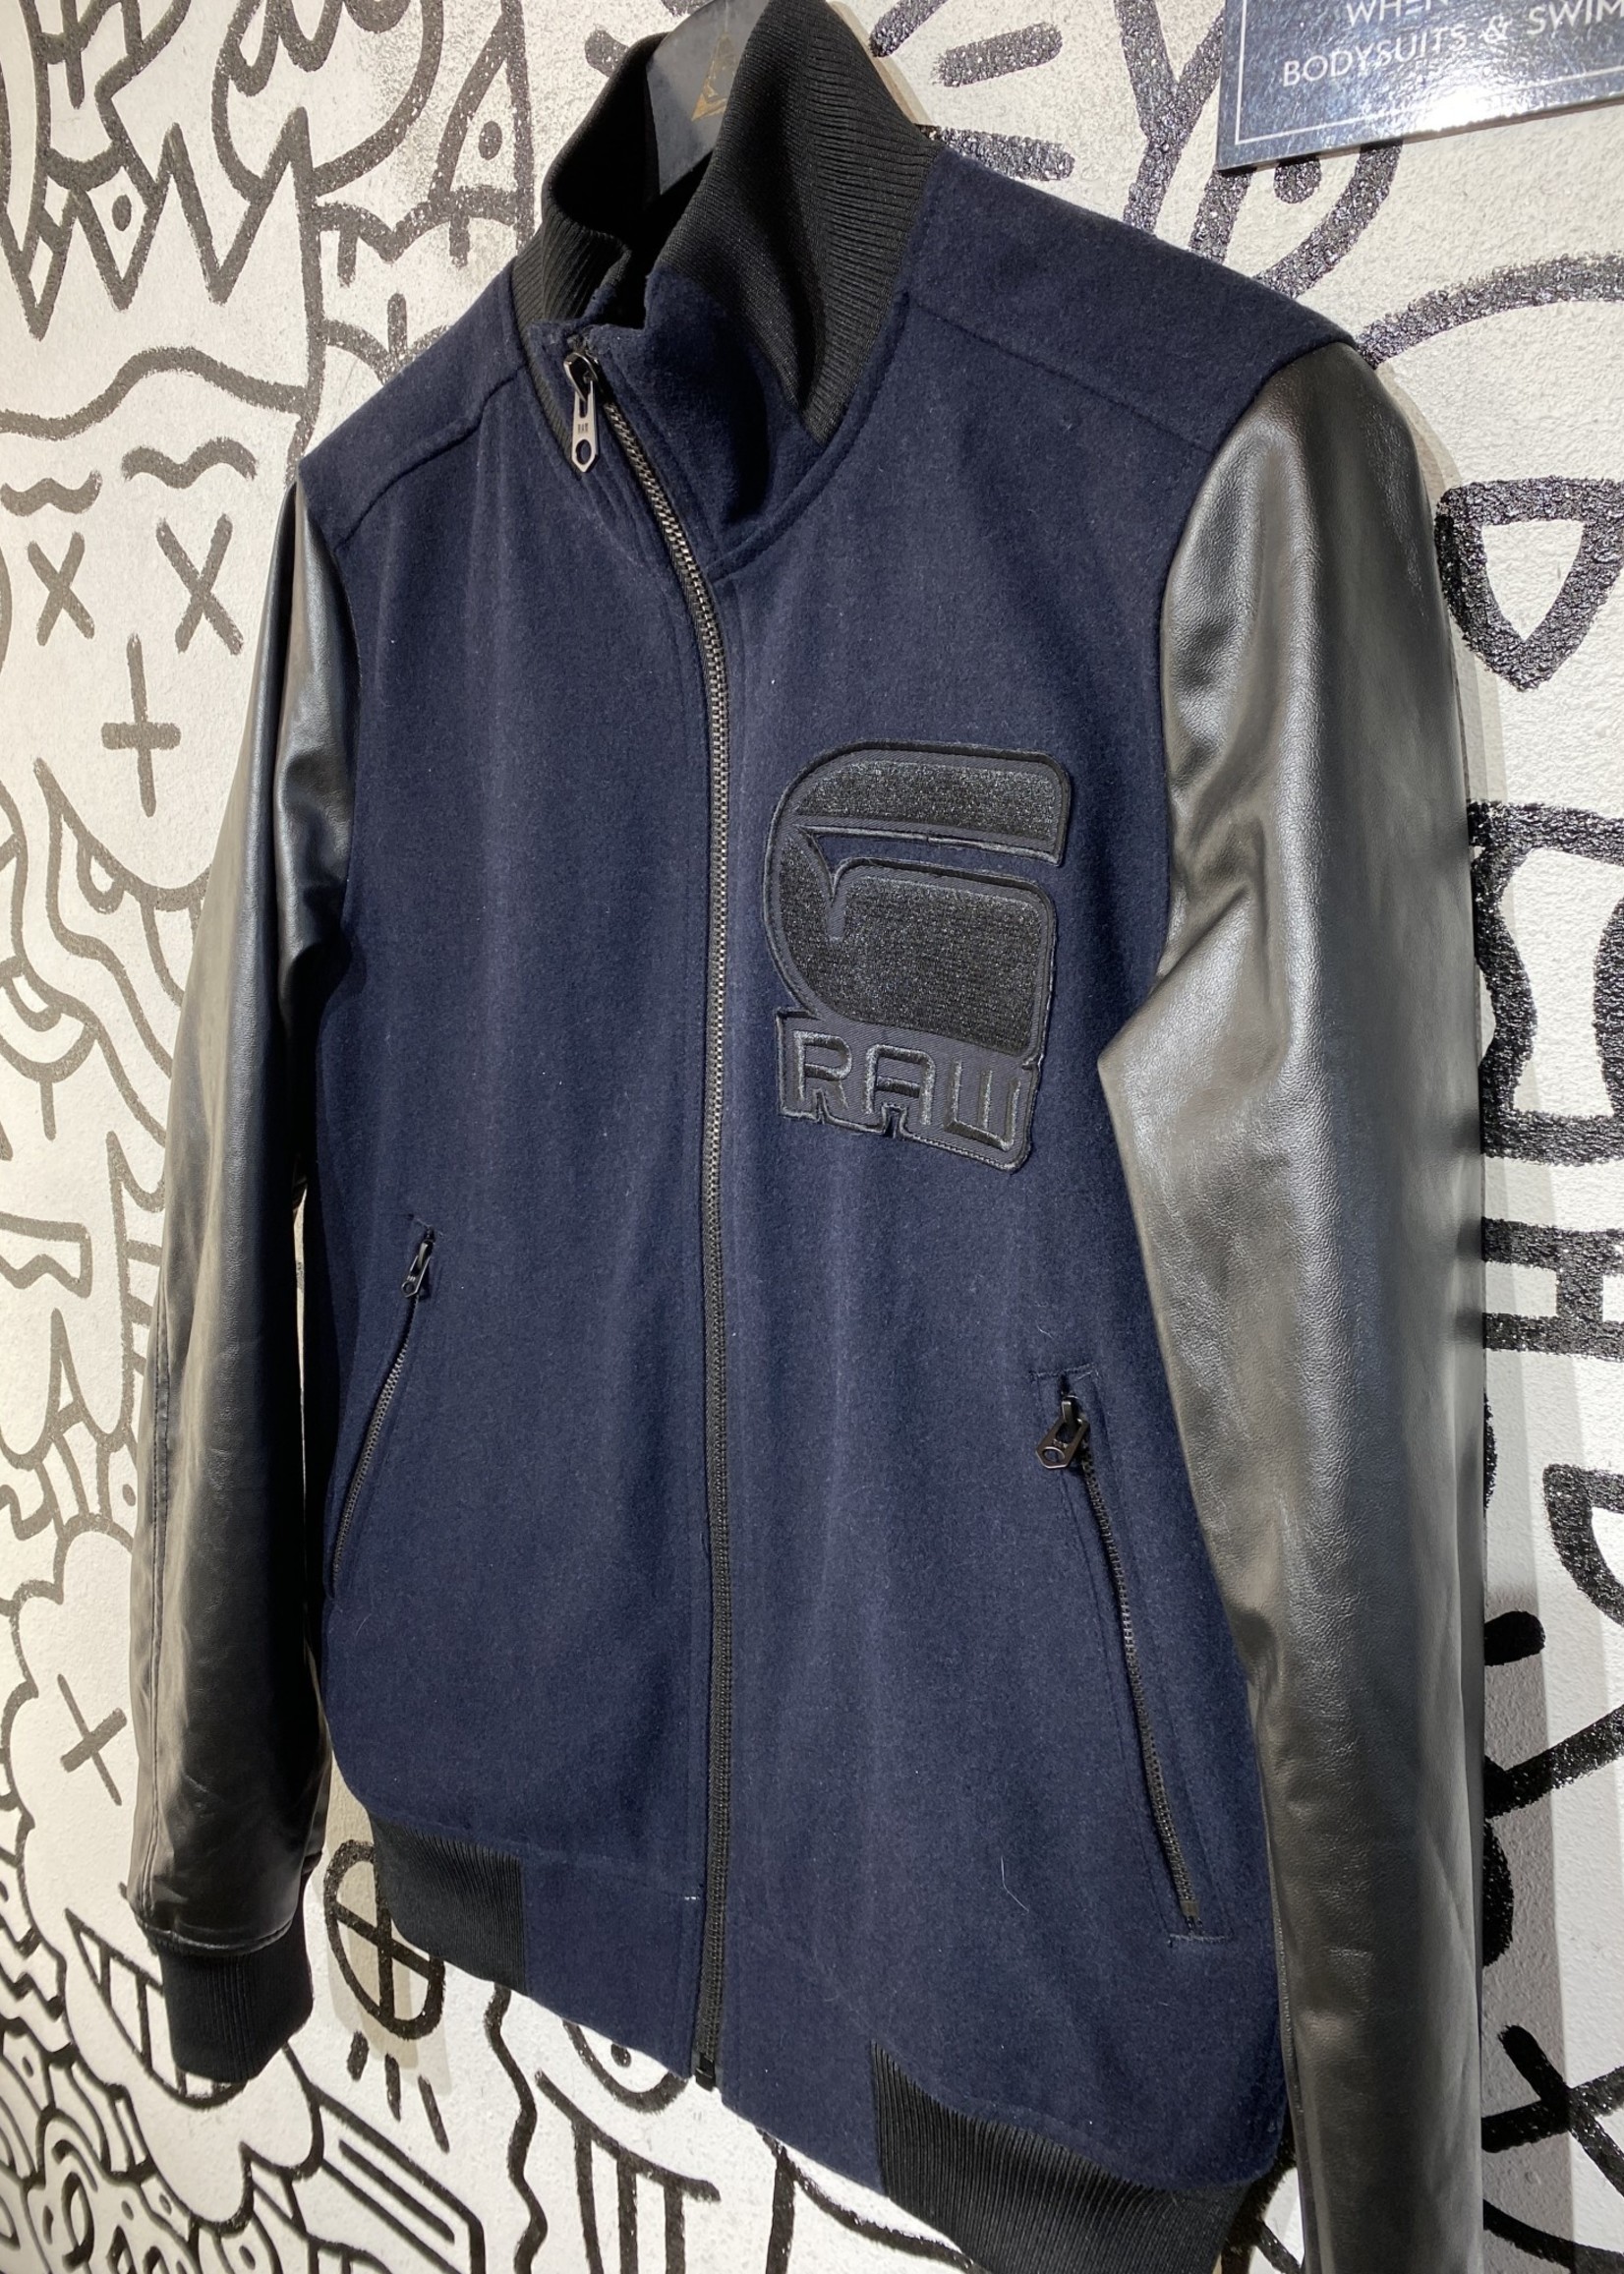 G Star Raw Navy/Faux Leather Bomber M